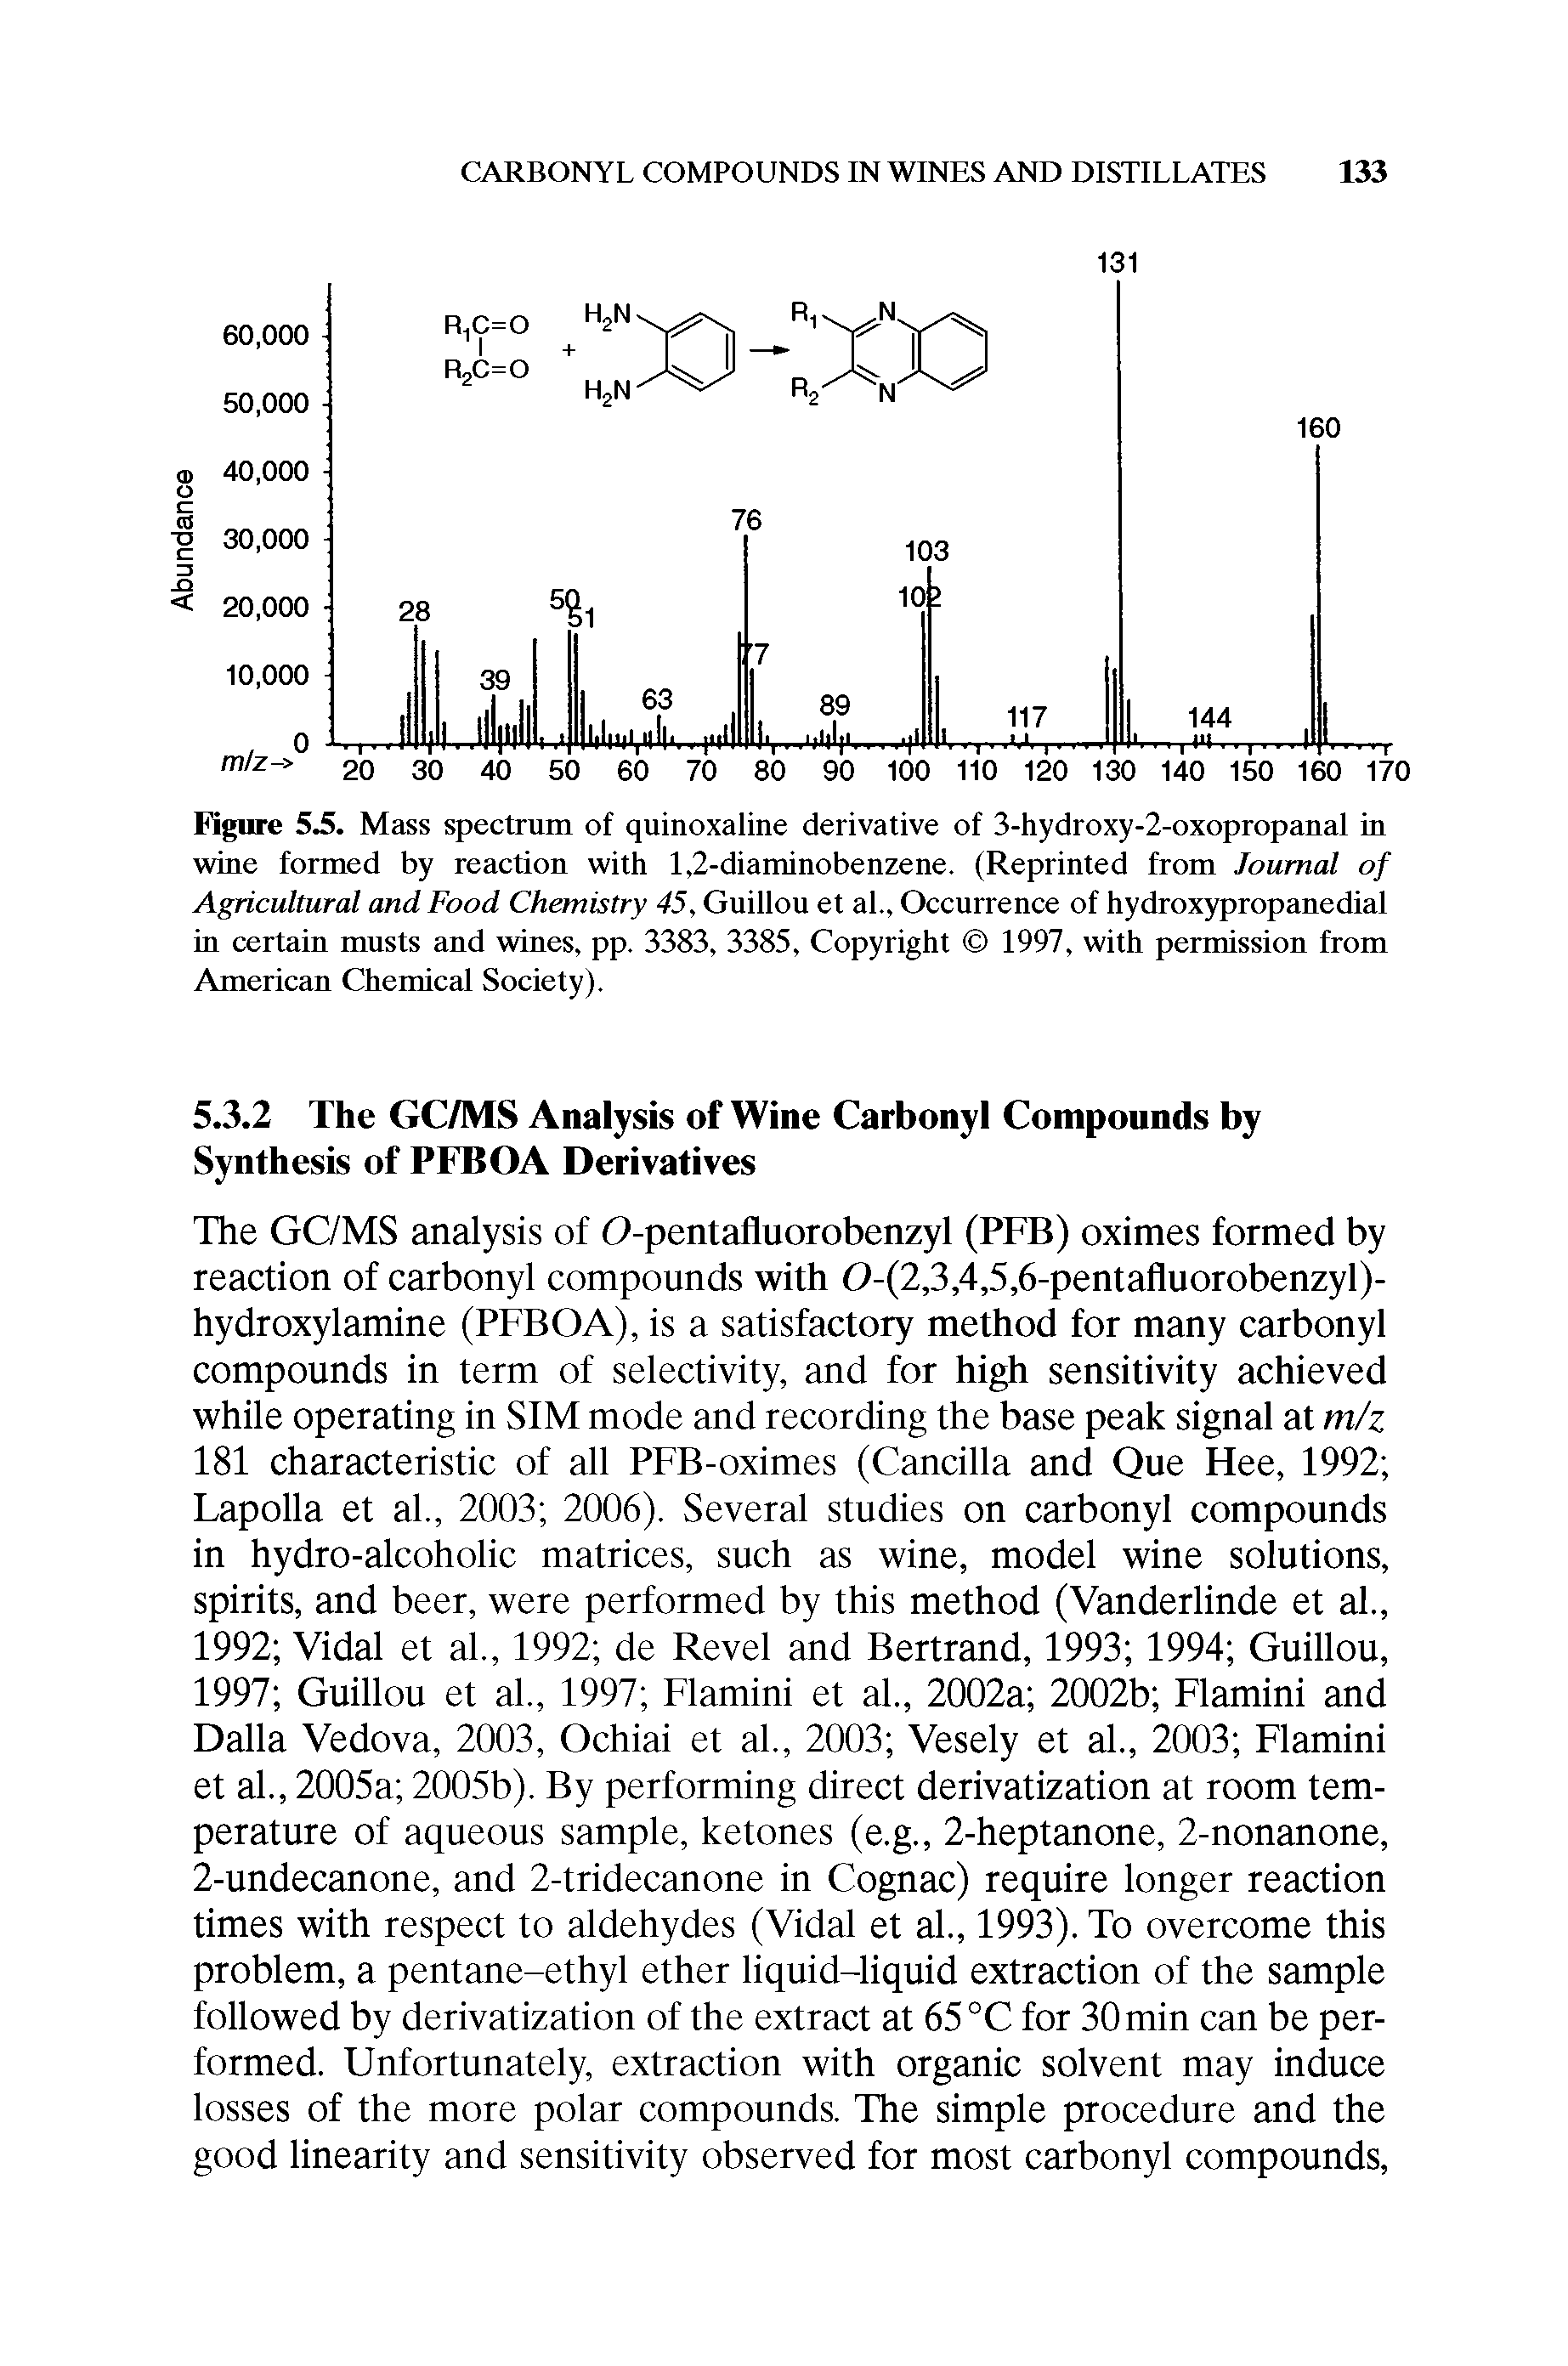 Figure 5.5. Mass spectrum of quinoxaline derivative of 3-hydroxy-2-oxopropanal in wine formed by reaction with 1,2-diaminobenzene. (Reprinted from Journal of Agricultural and Food Chemistry 45, Guillou et al., Occurrence of hydroxypropanedial in certain musts and wines, pp. 3383, 3385, Copyright 1997, with permission from American Chemical Society).